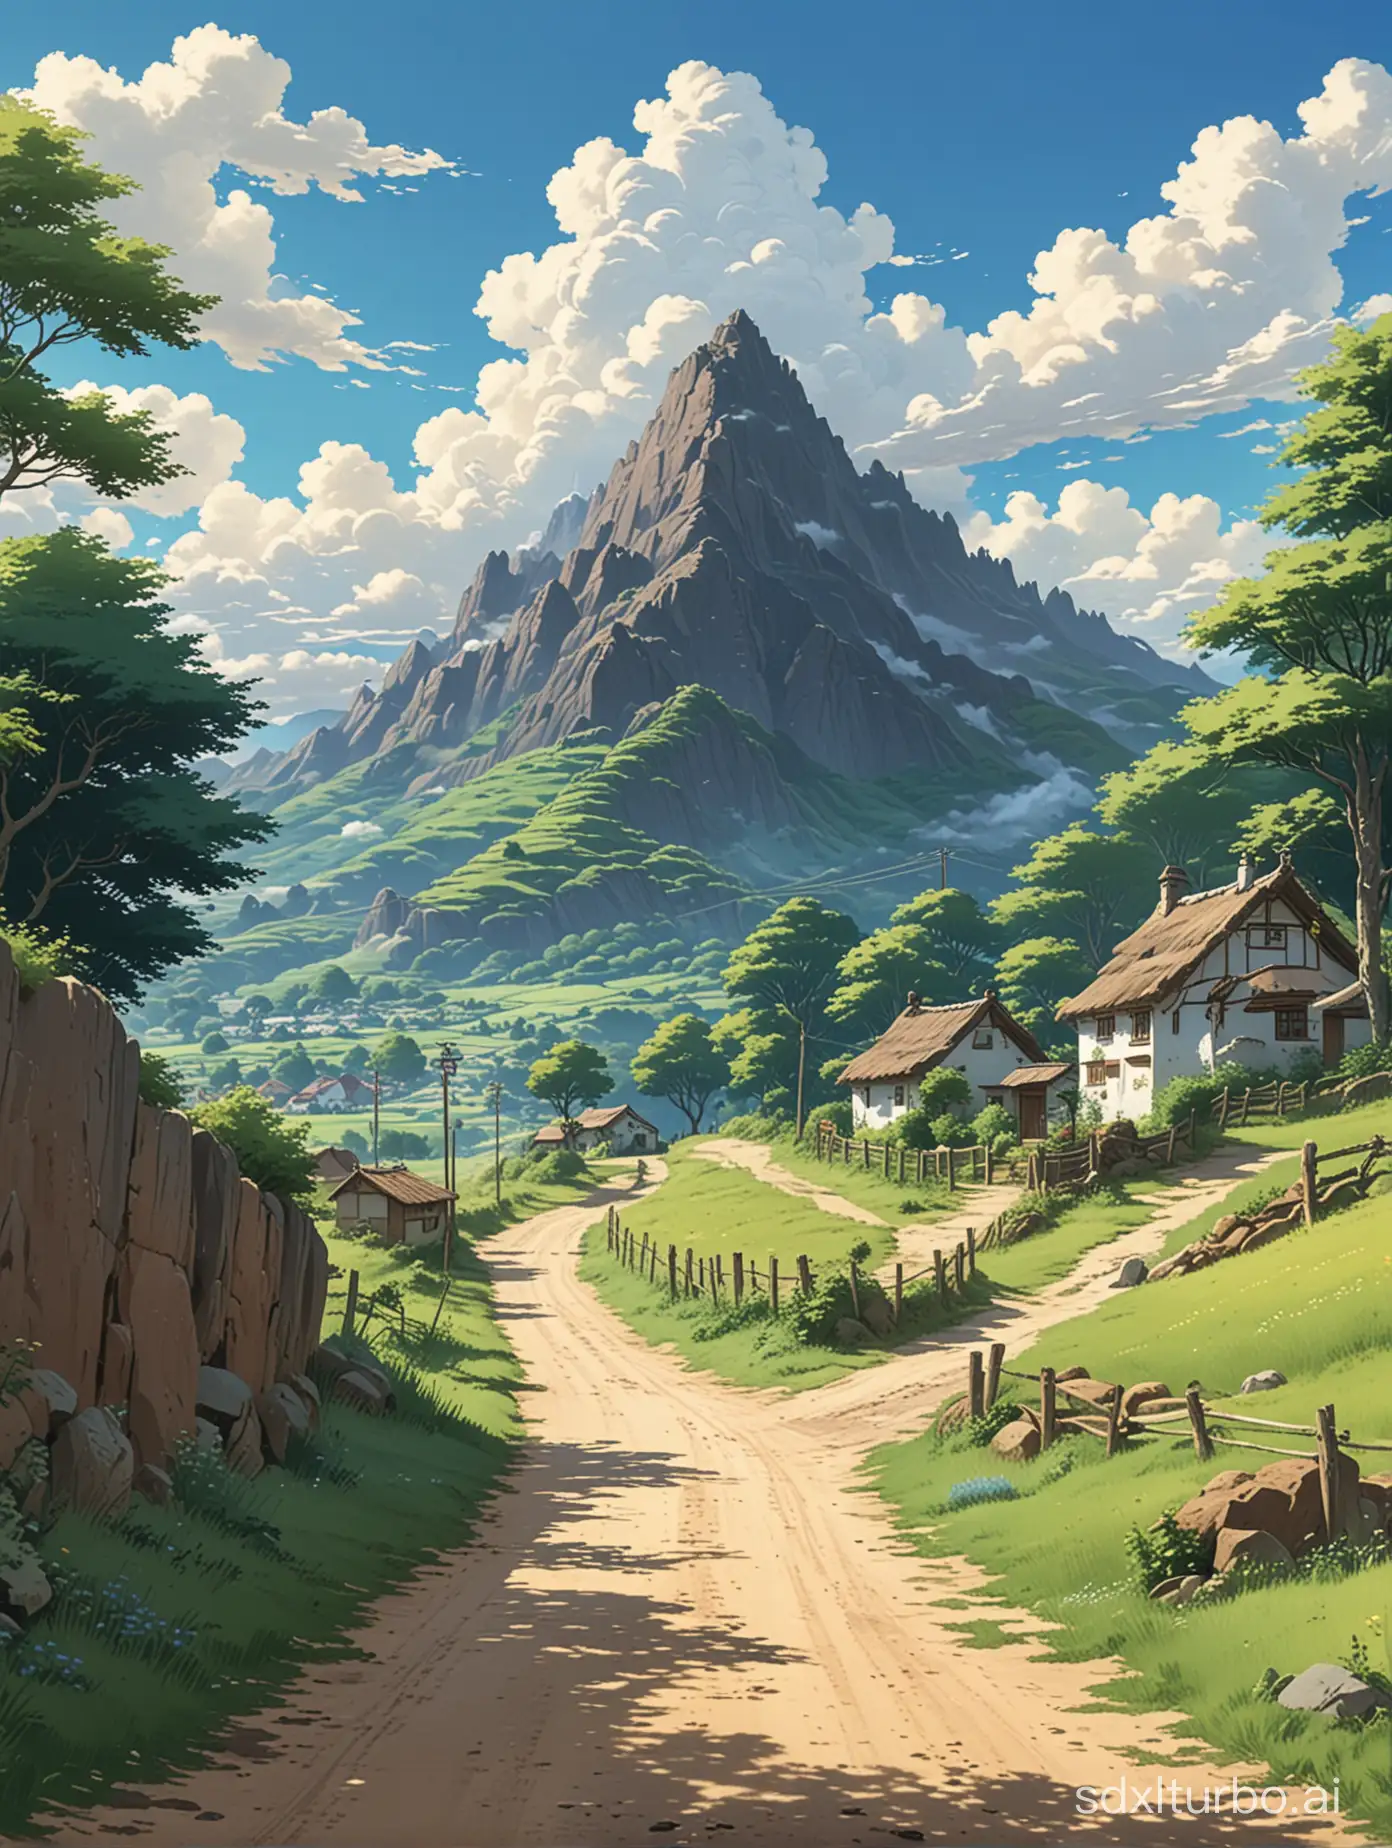 A dirt road leads towards a small village with a large mountain in the background.Studio Ghibli anime style,fluppy white clouds,blue sky